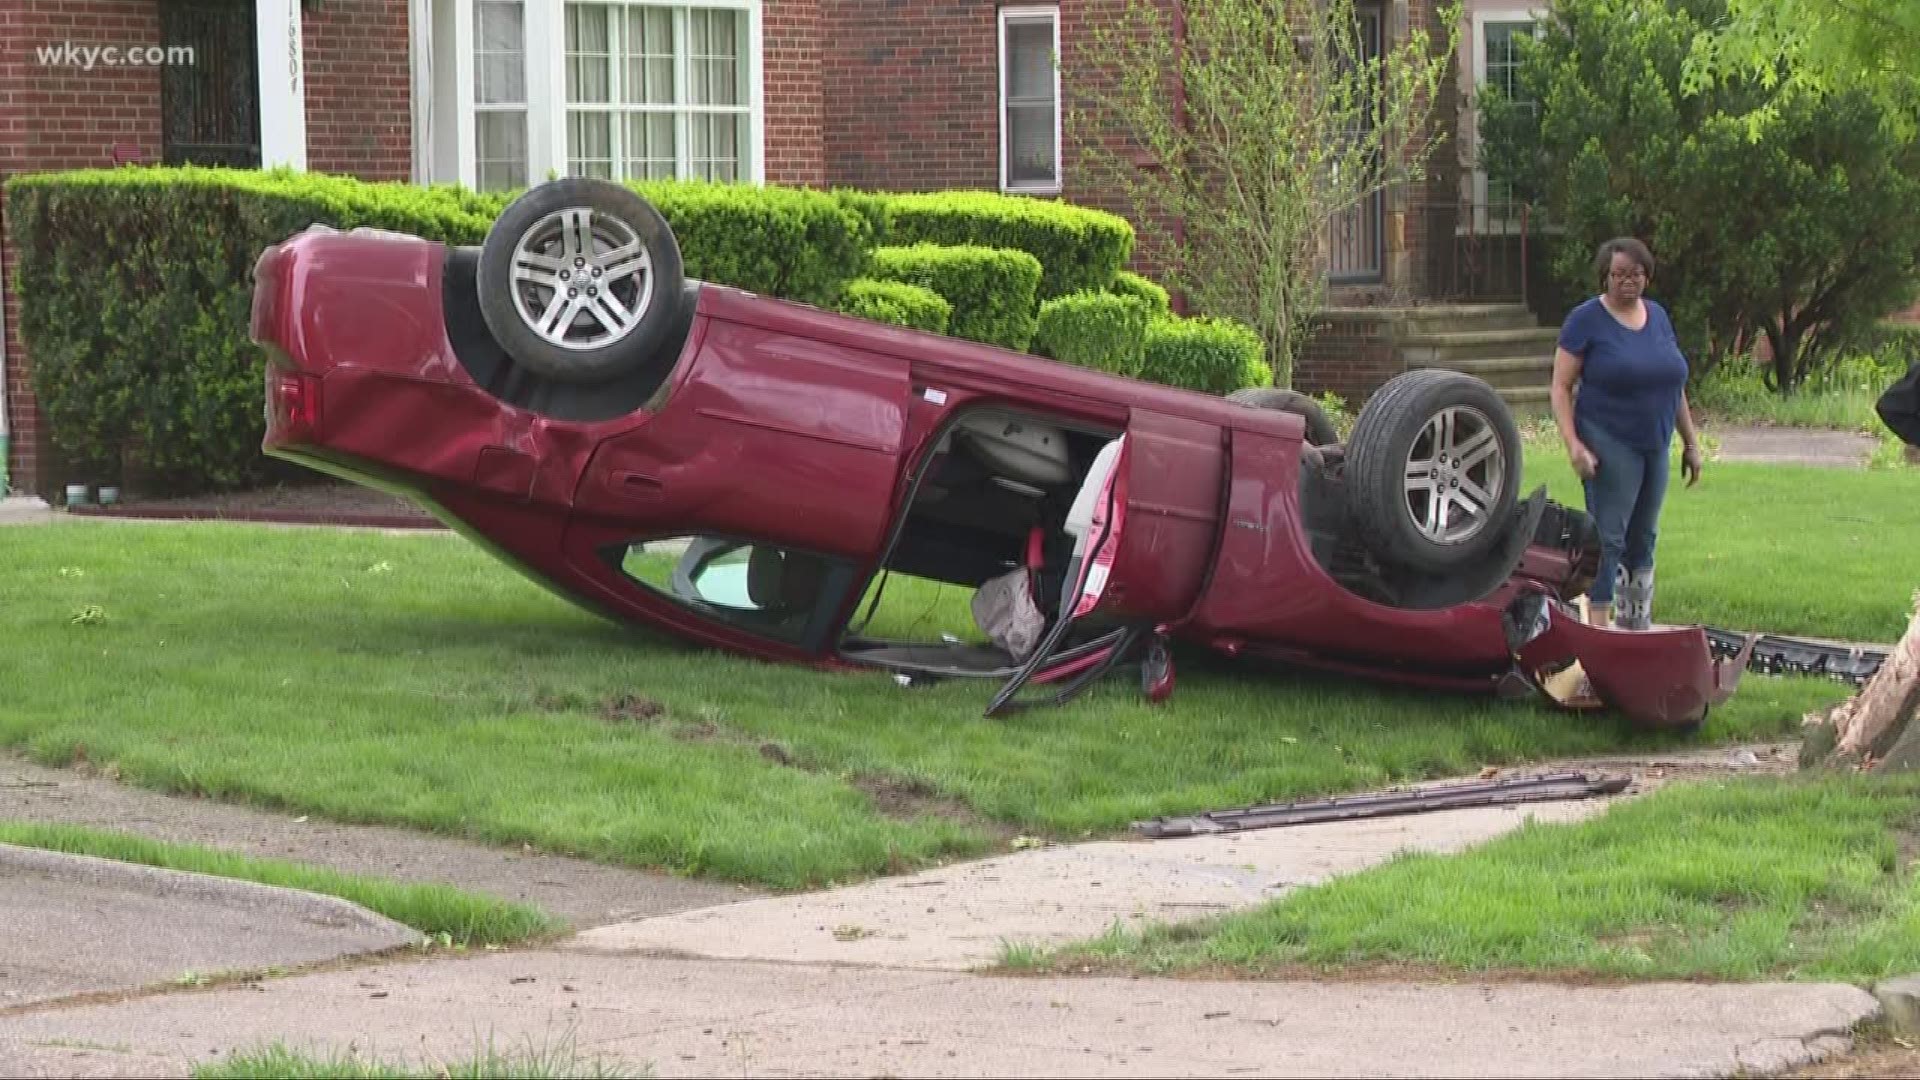 The crash occurred near East 168th St. and Talford Ave. around 4:30 p.m. The car appeared to strike a tree and ended up flipping over onto the grass in a front yard.